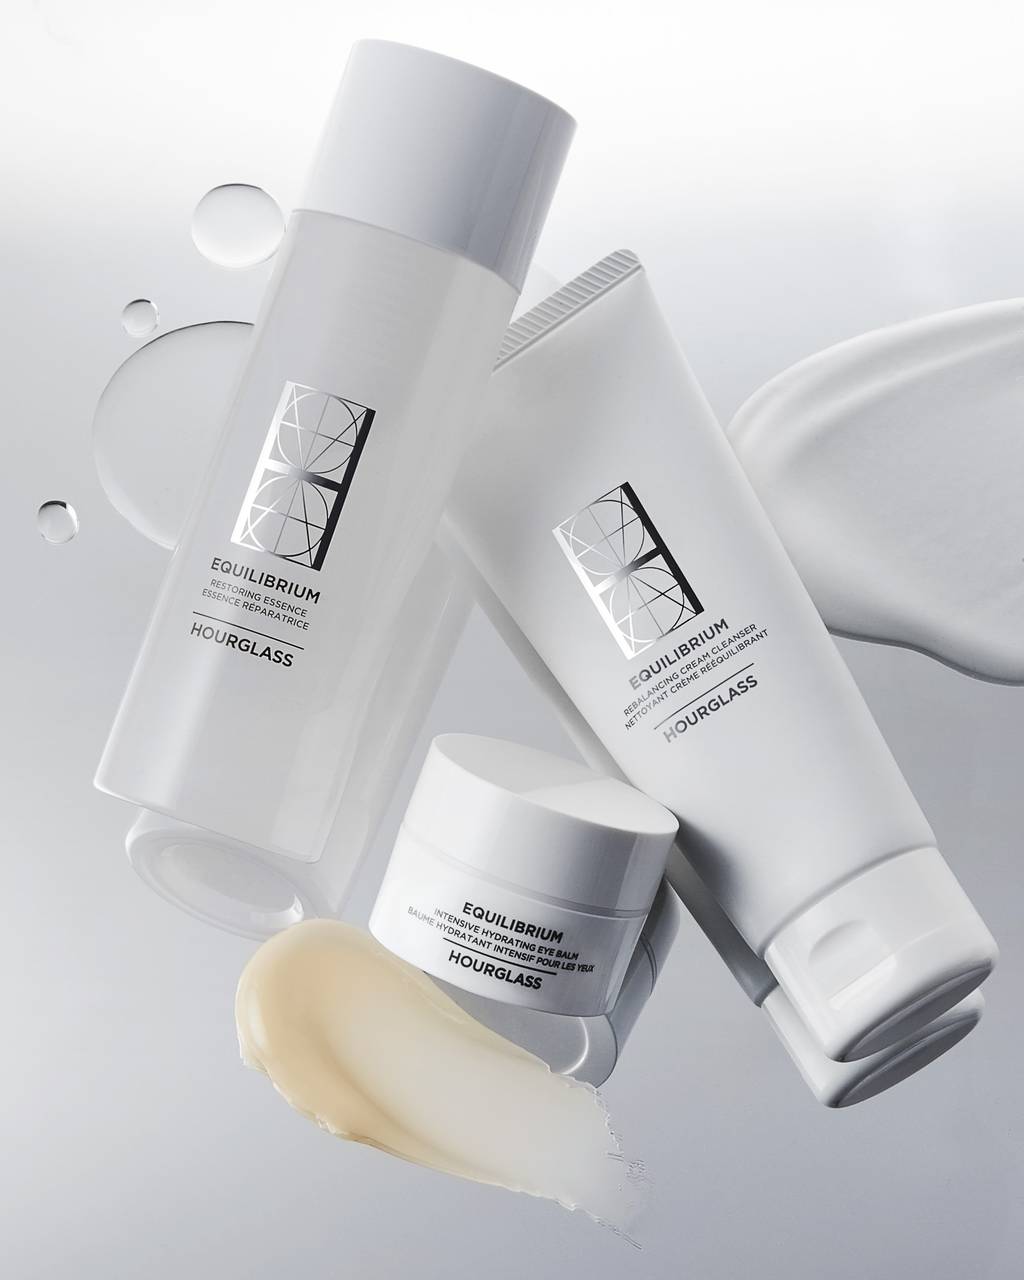 Hourglass is the latest cosmetics brand to enter the booming skin-care market | Source: Courtesy